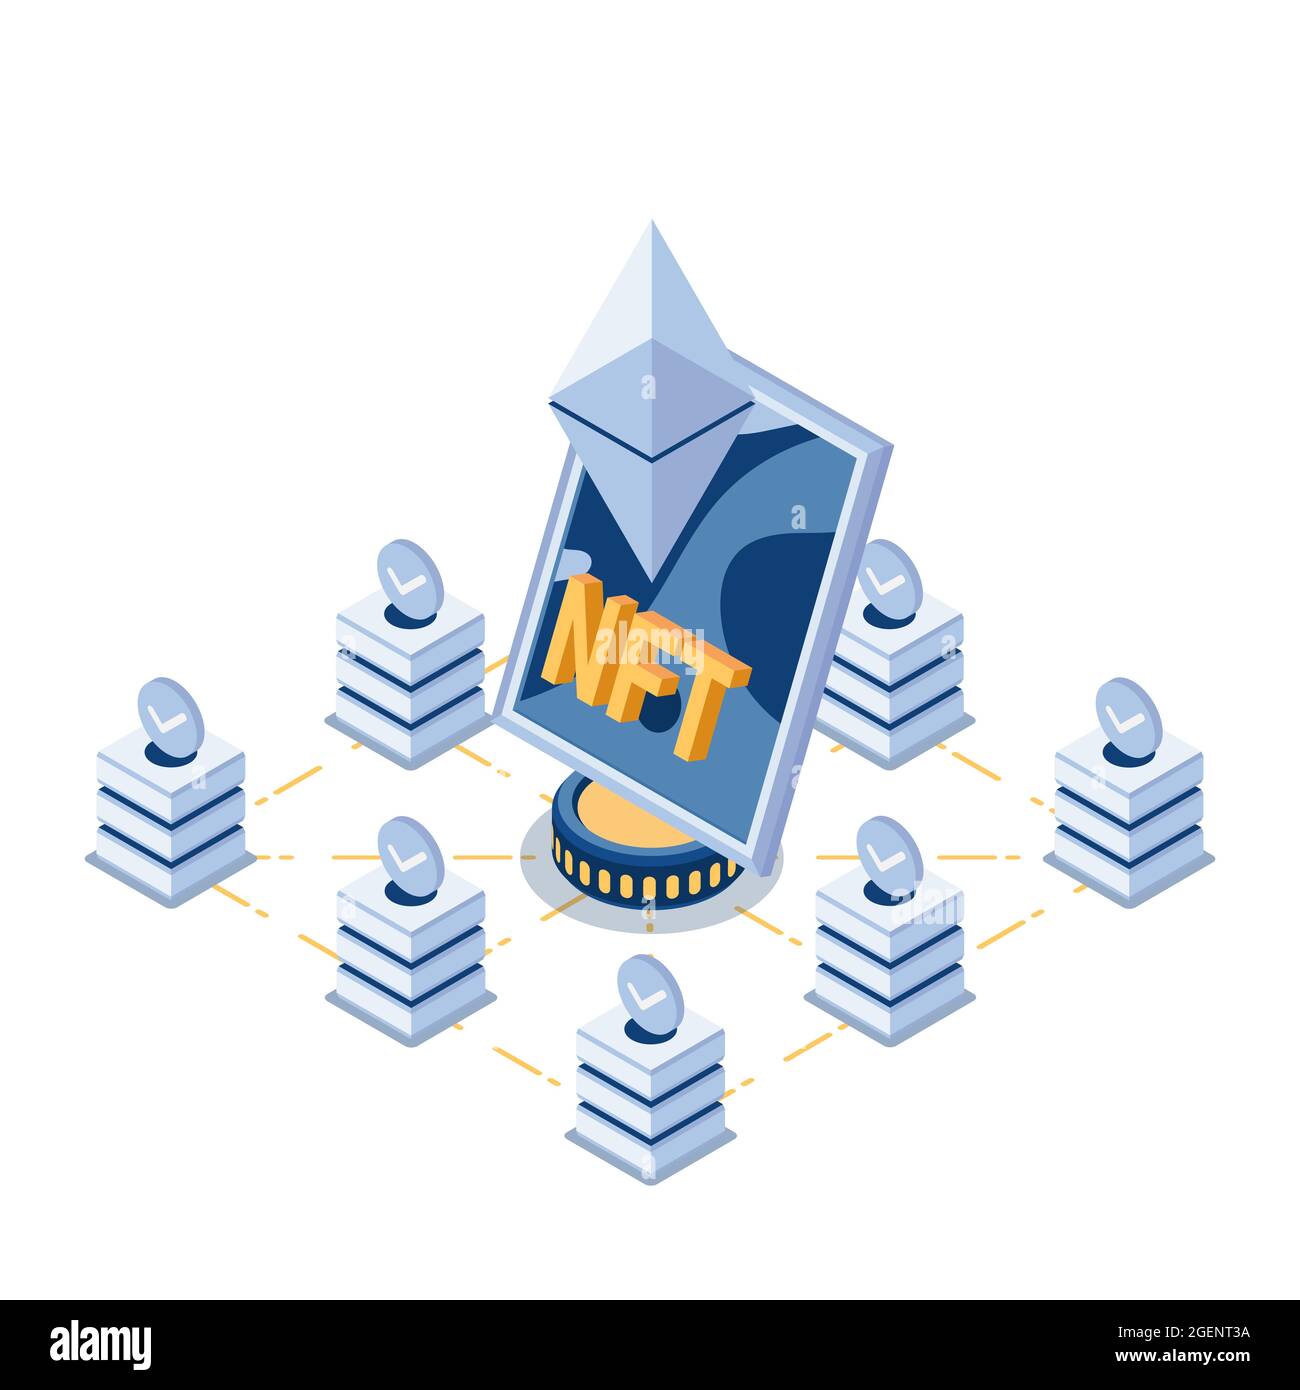 Flat 3d Isometric NFT Non Fungible Tokens Art in The Center of BlockChain Technology. NFT and Crypto Art Concept. Stock Vector